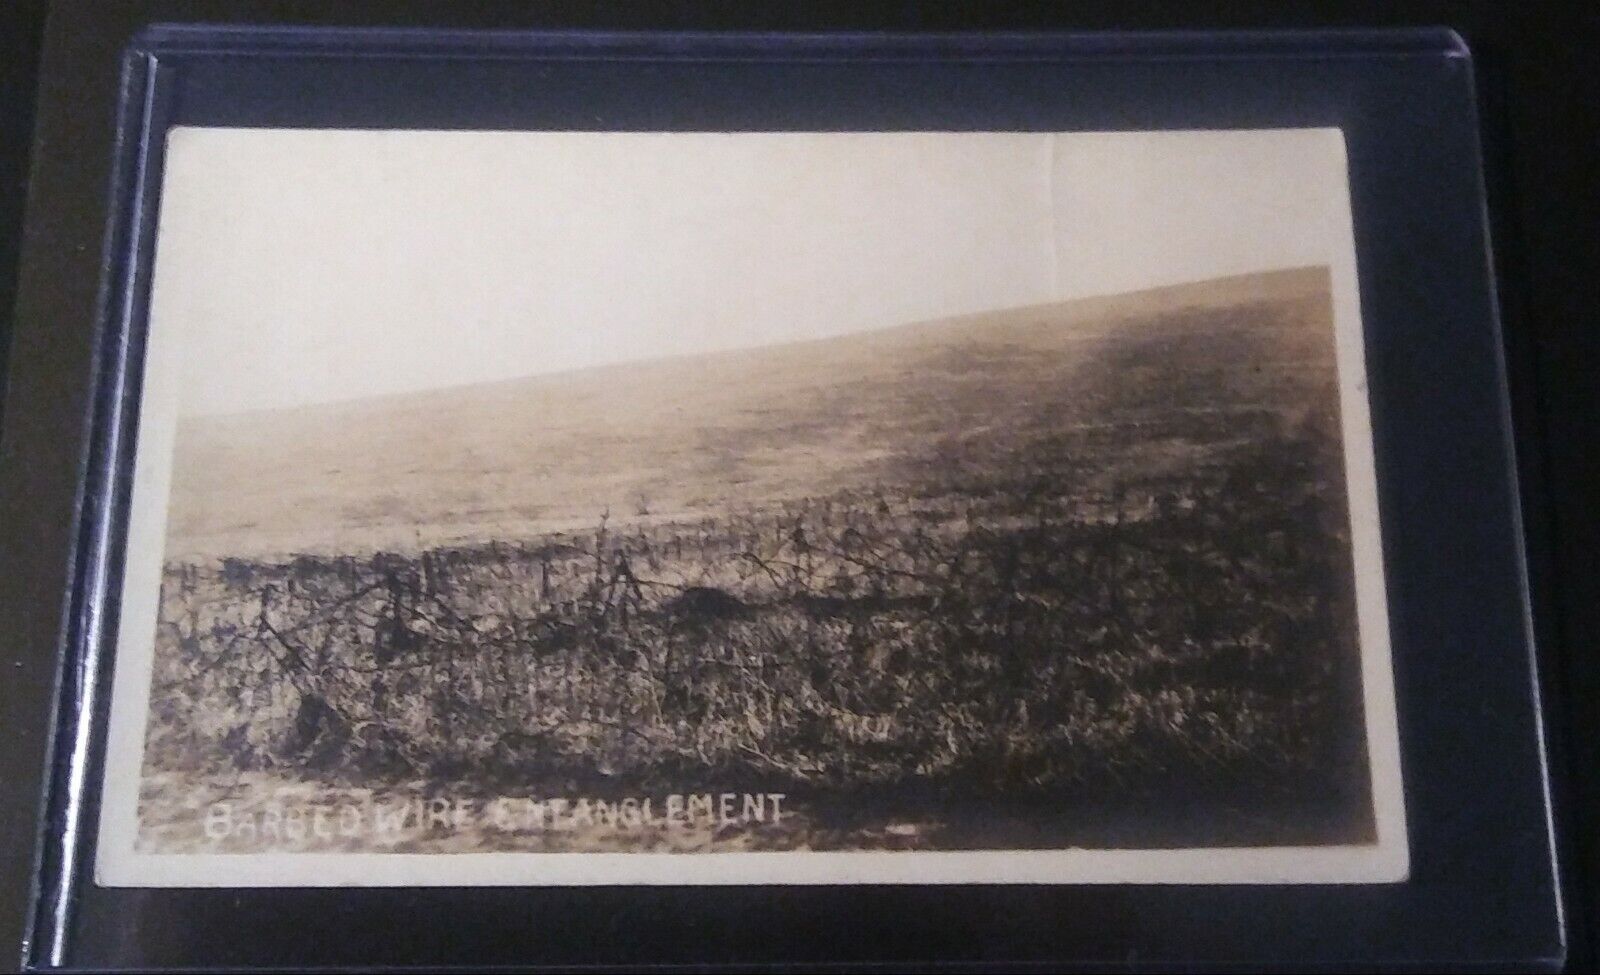 RPPC PHOTOGRAPH POSTCARD  WW1 U.S. BARBED WIRE ENTANGLEMENT SOMEWHERE IN FRANCE.